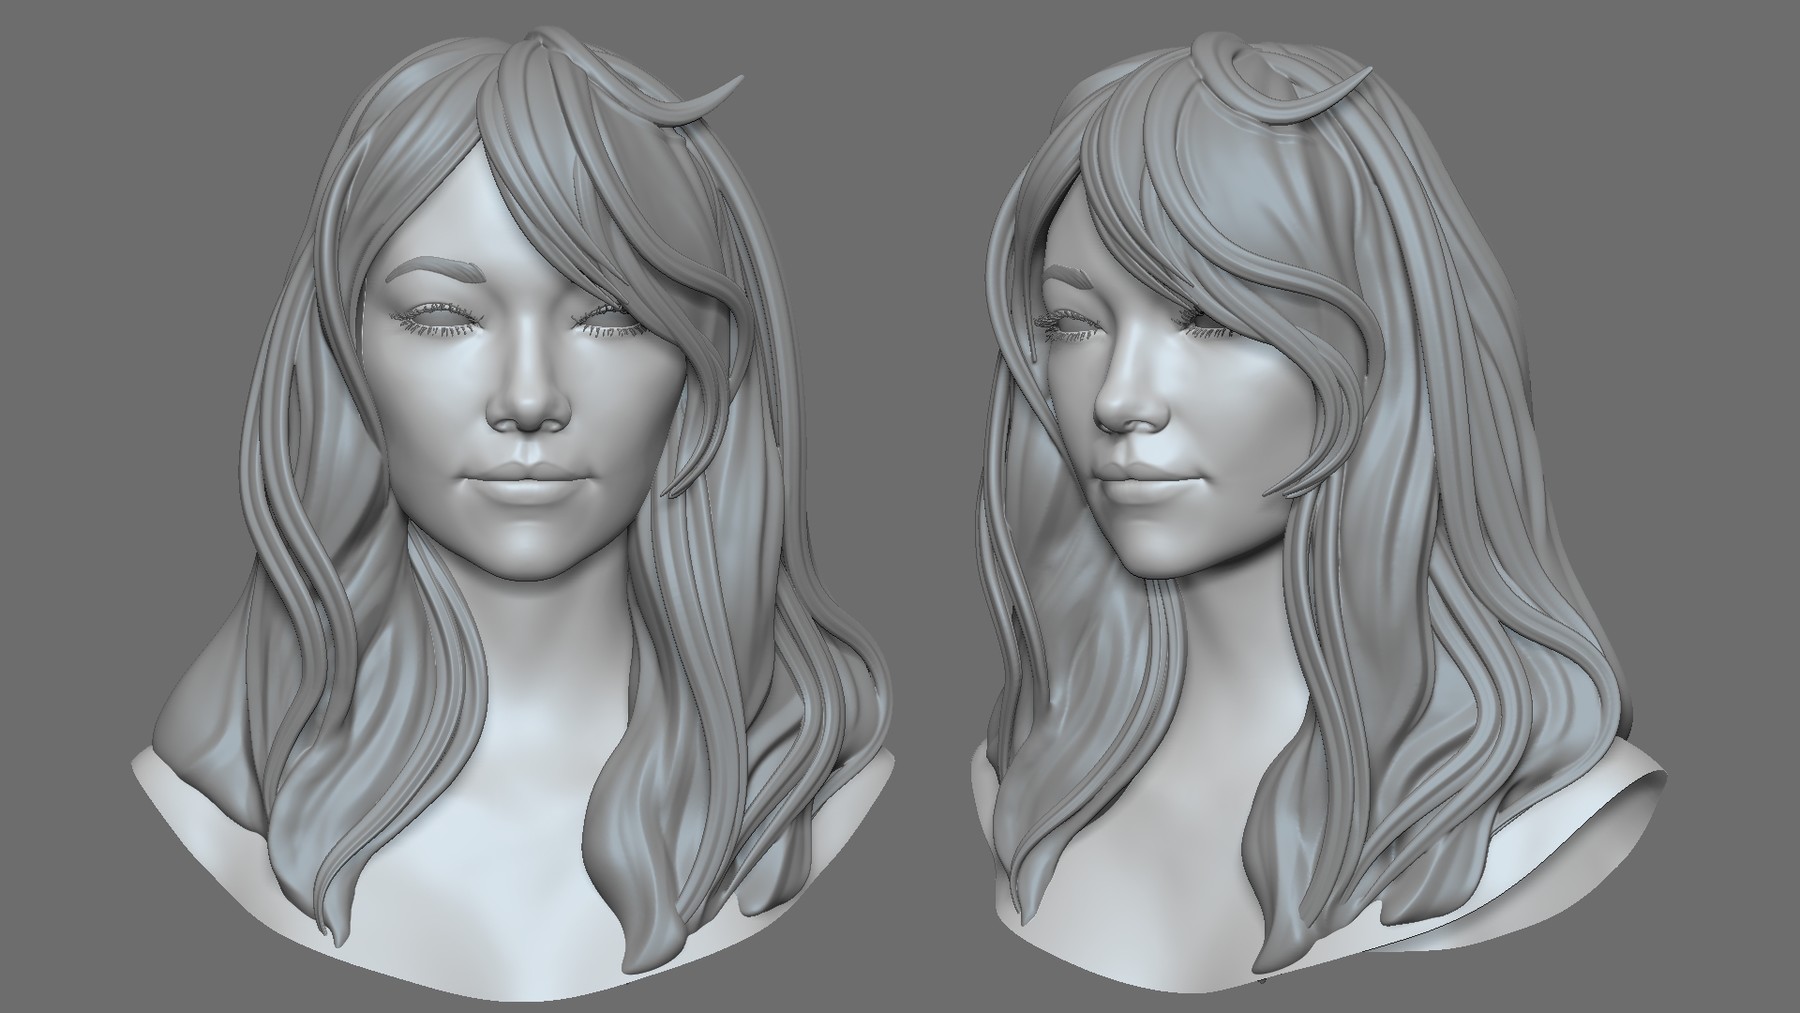 zbrush high poly sculpt to render